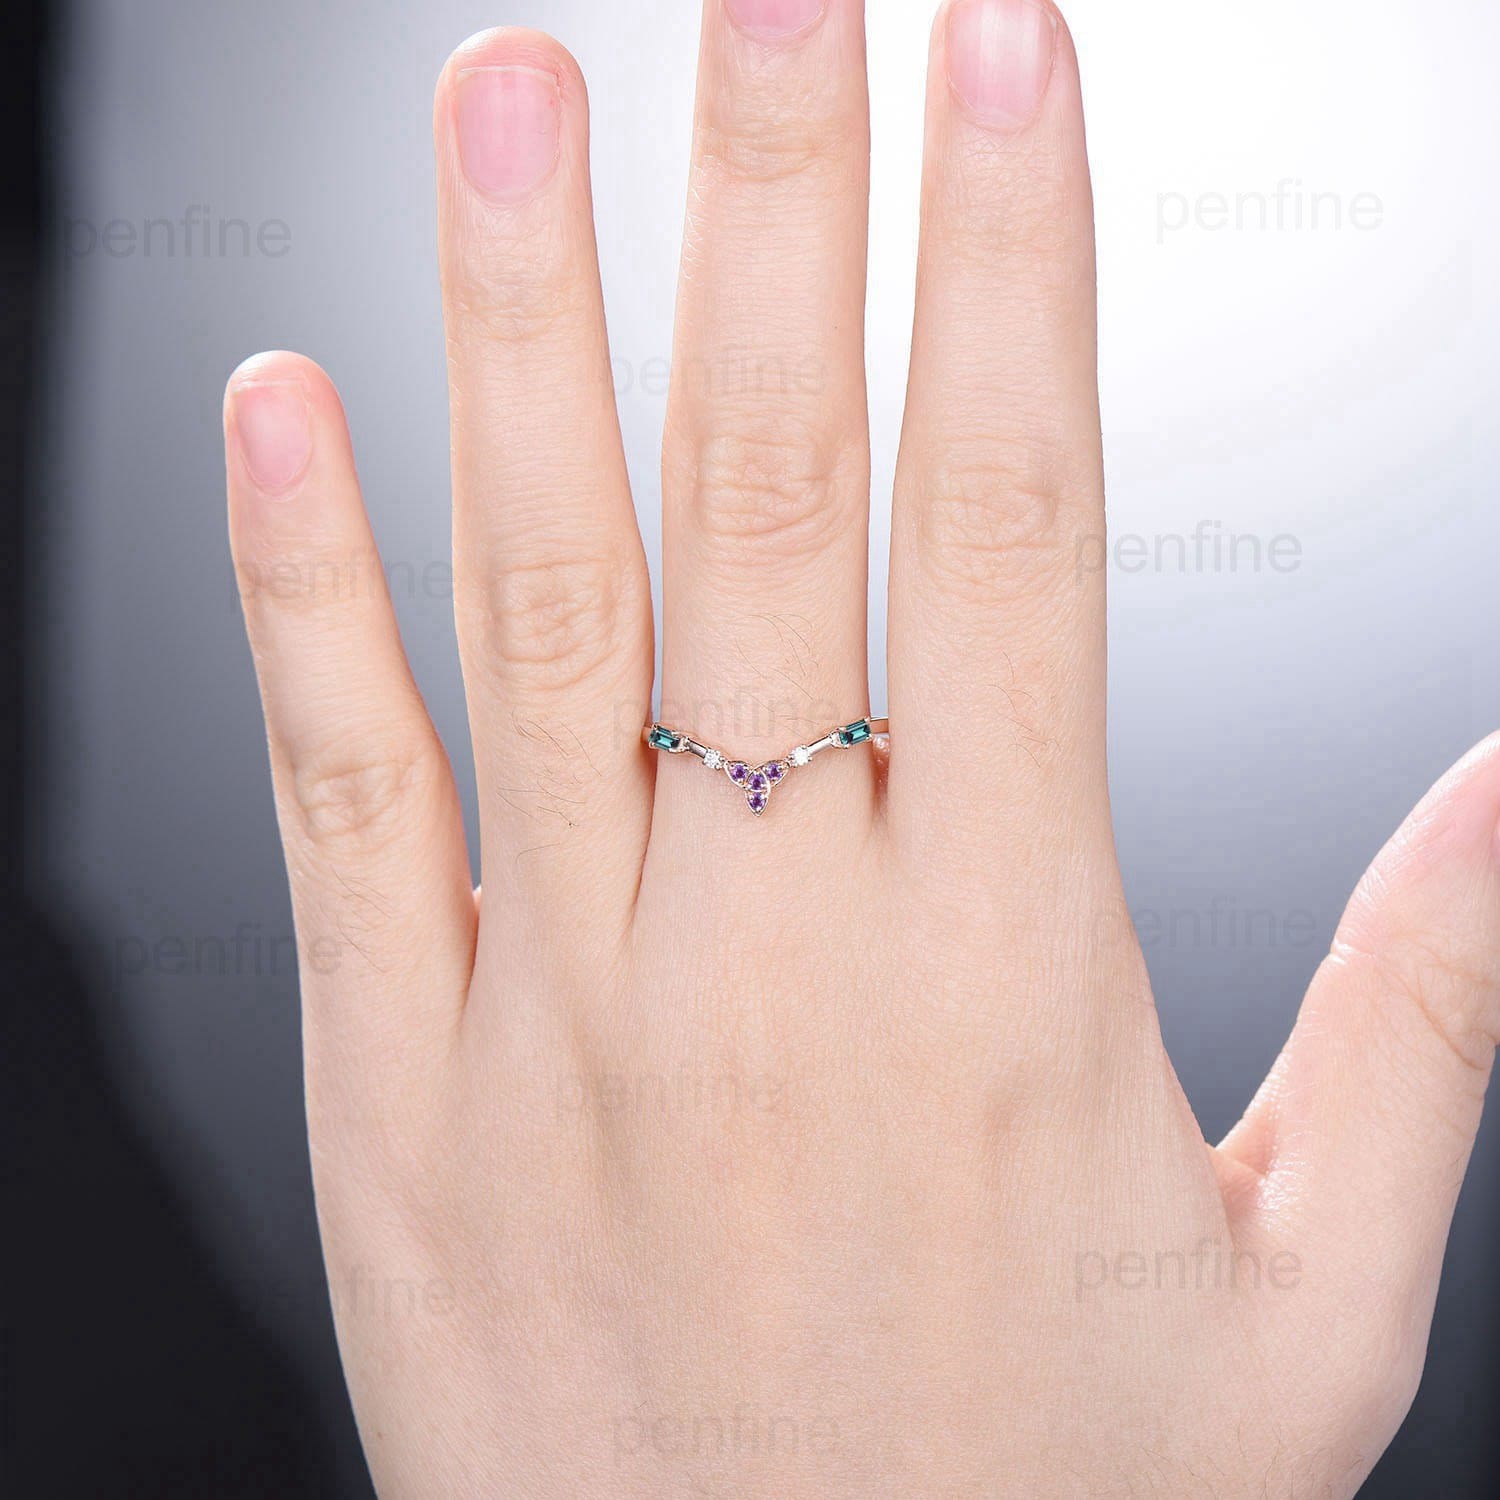 Norse Viking amethyst alexandrite wedding band women baguette color change stone wedding ring rose gold curved stacking band birthday gift - PENFINE